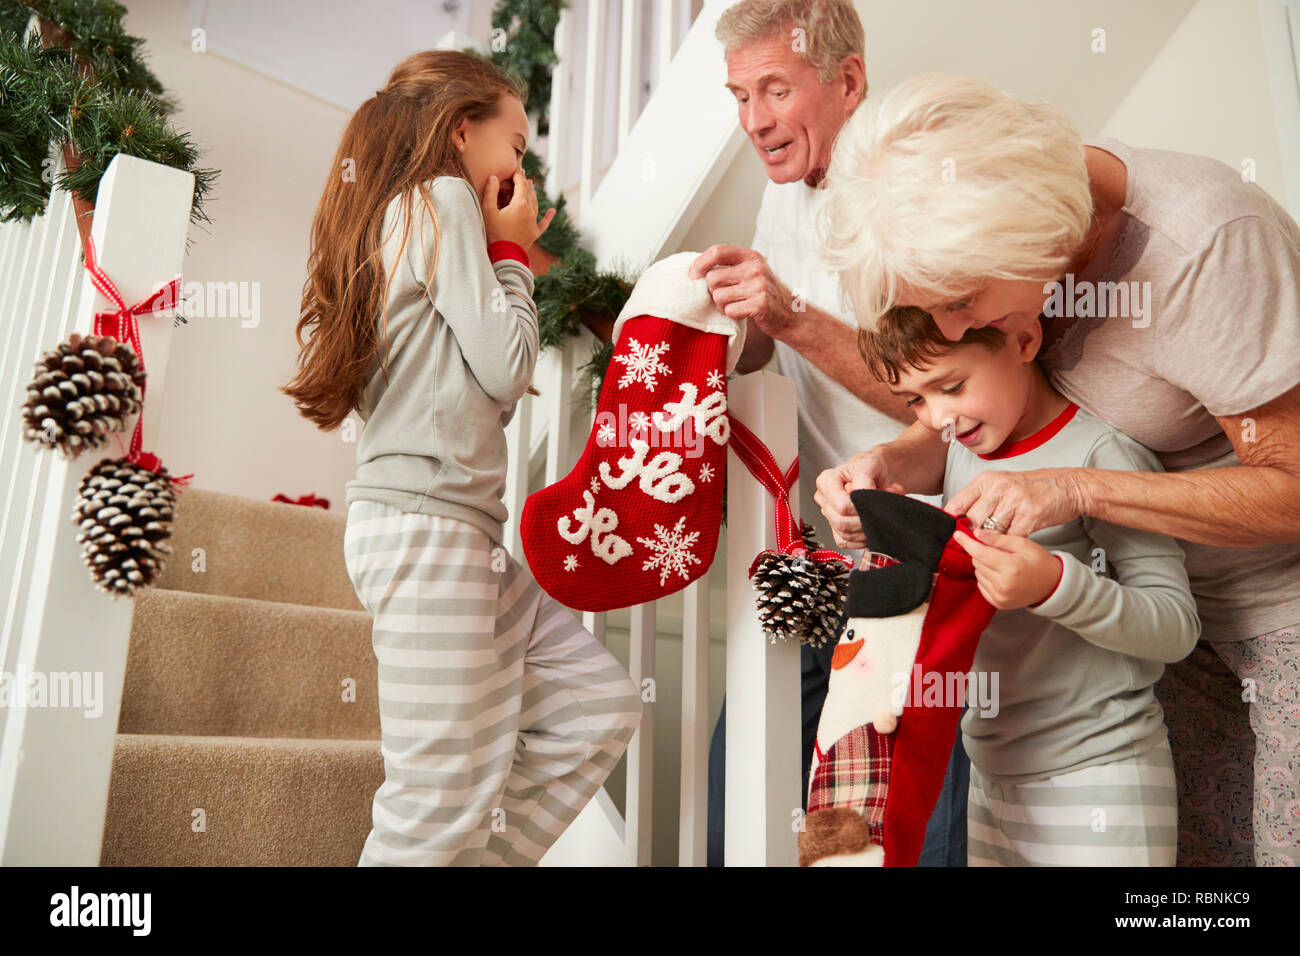 Grandparents Greeting Excited Grandchildren Wearing Pajamas Running Down Stairs Holding Stockings On Christmas Morning Stock Photo